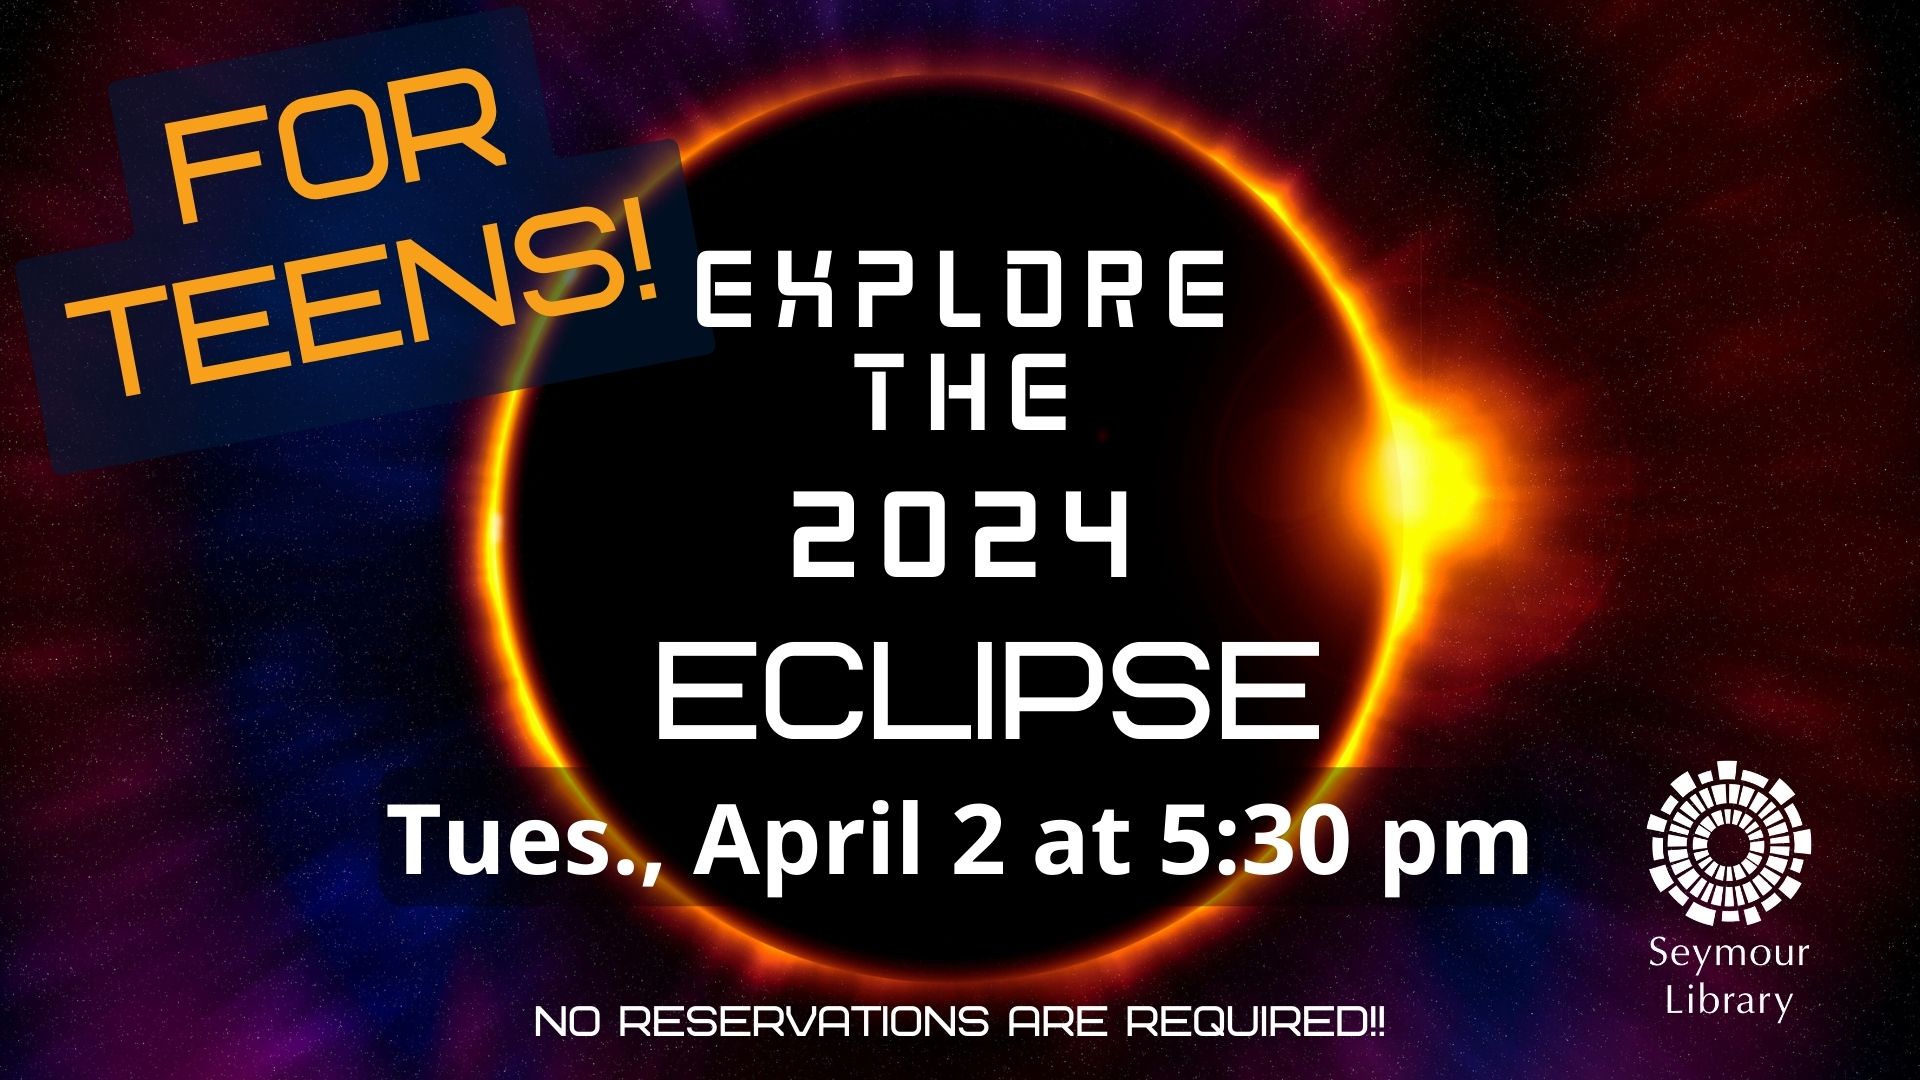 For Teens - Explore the 2024 Eclipse -- graphic with image of solar eclipse in outer space.